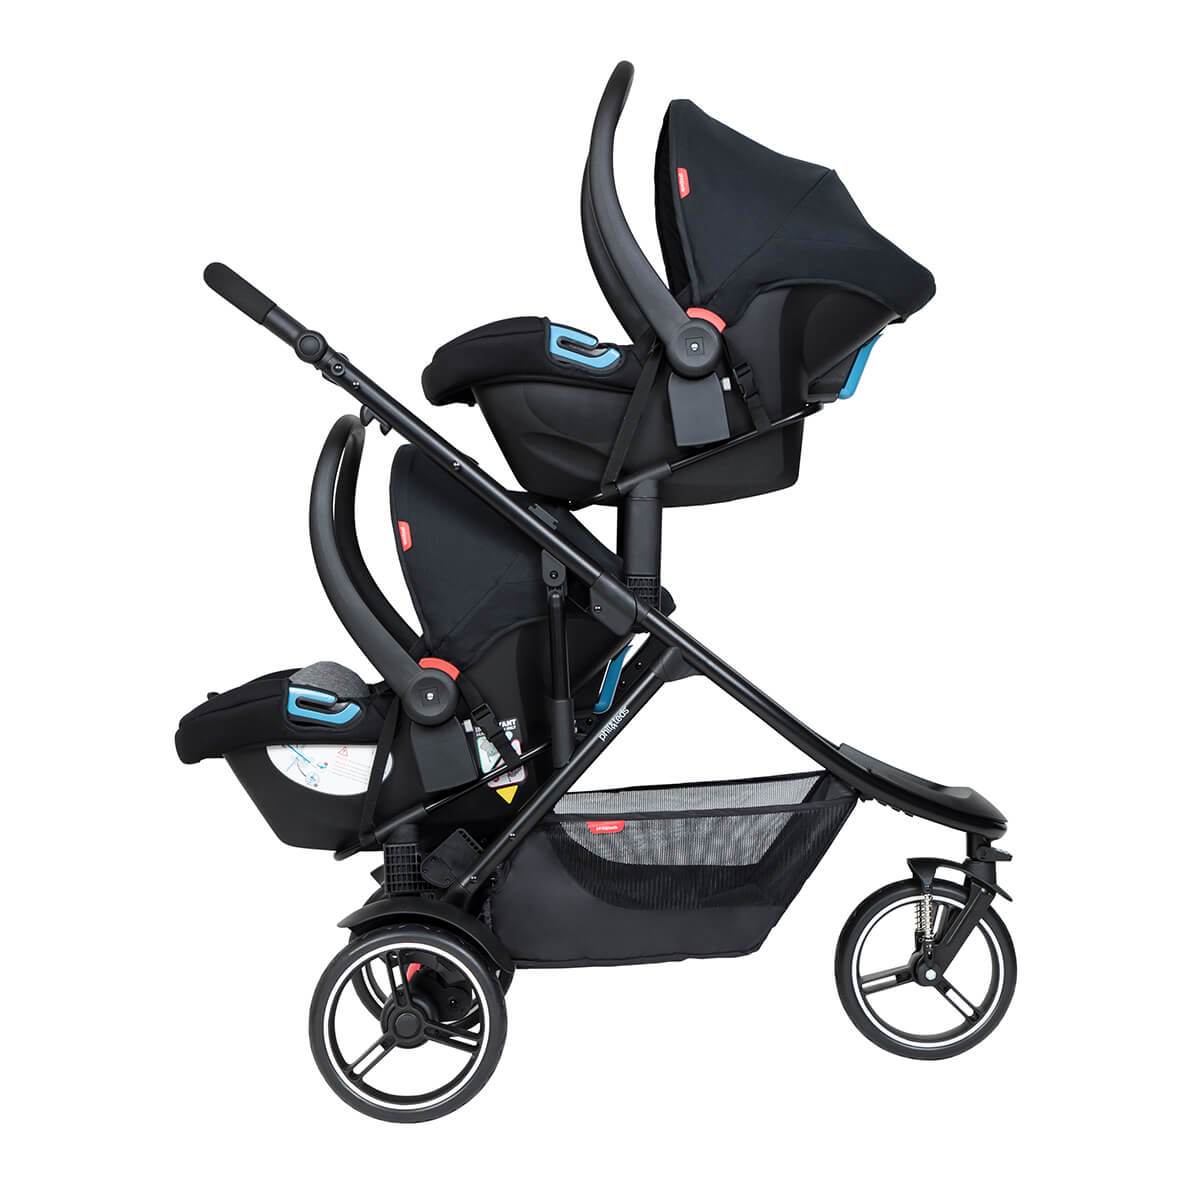 2 parent facing infant carseats attached to dot pram using travel system adaptors